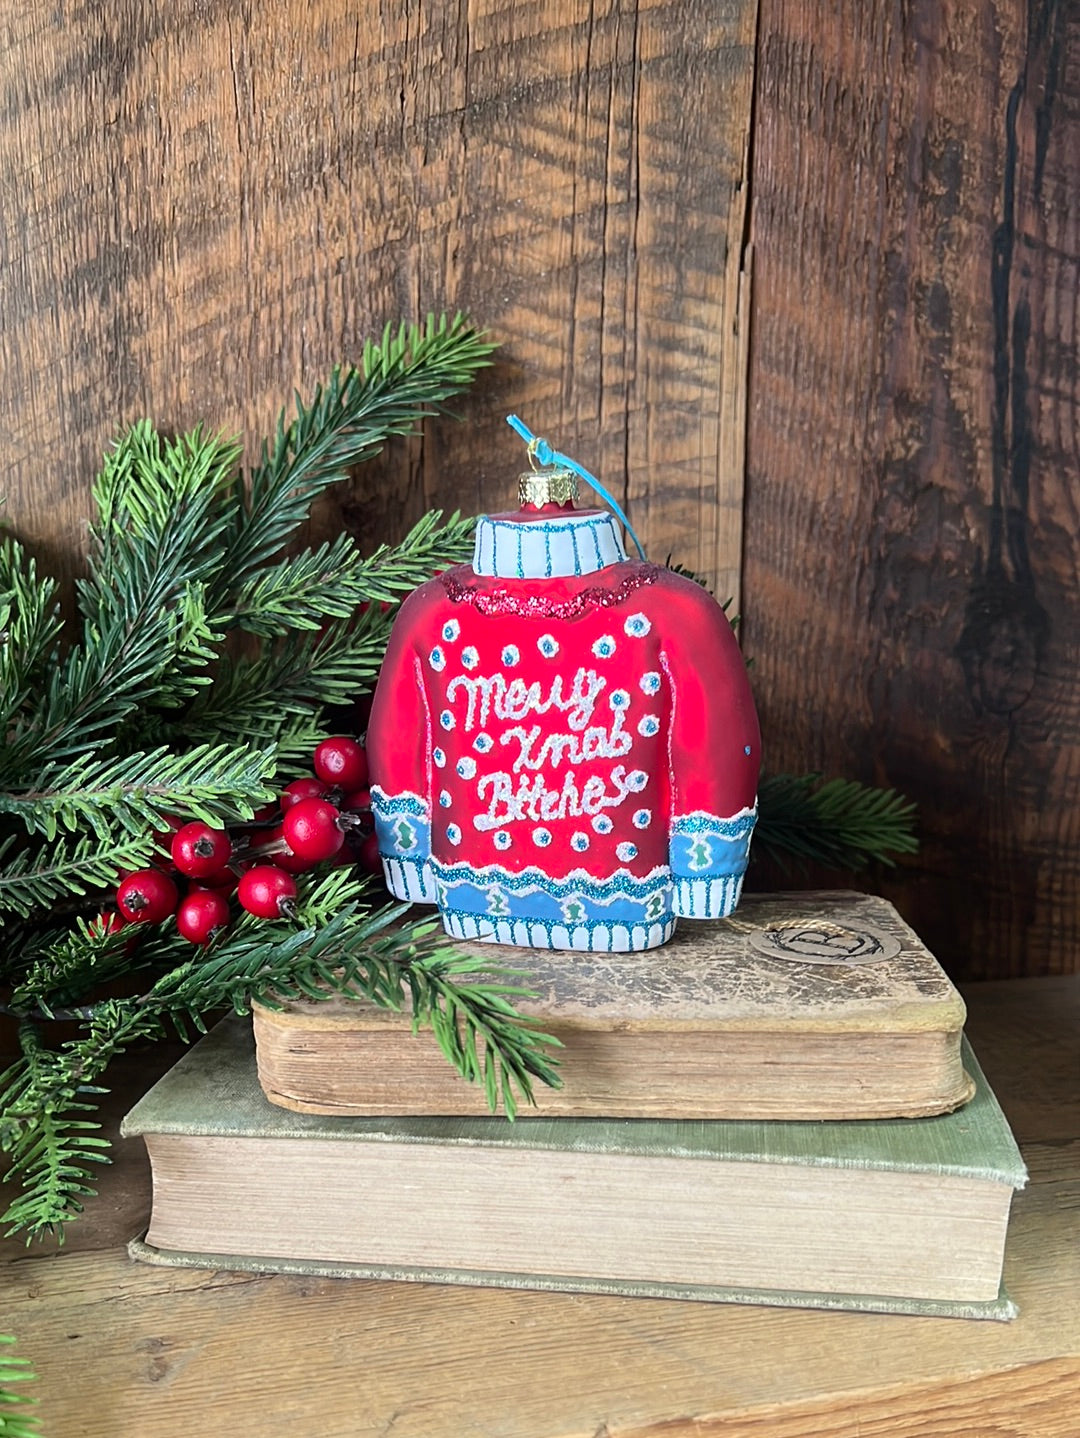 Ugly Christmas Red Sweater Glass and Glitter Ornament